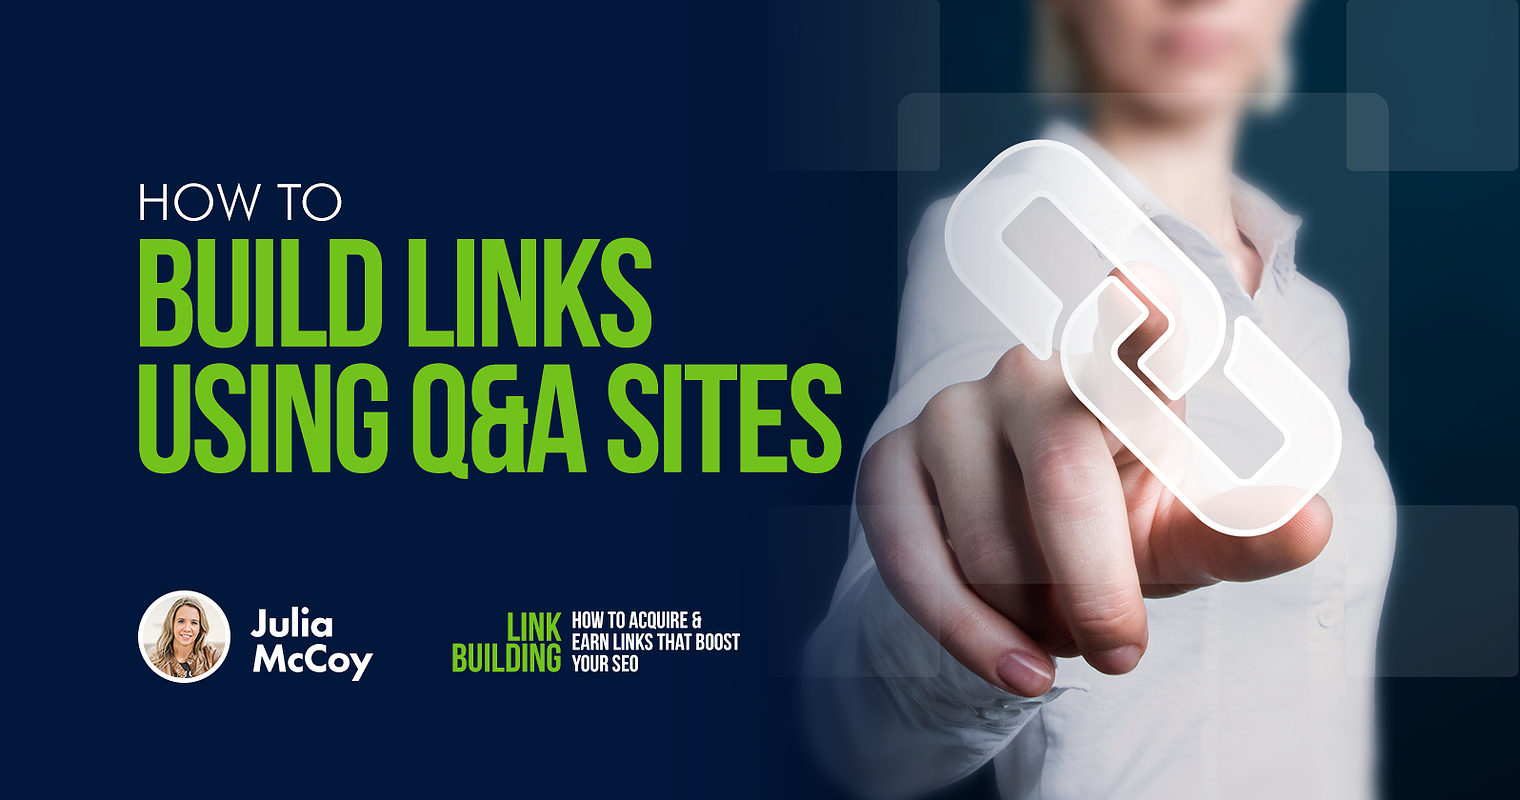 How to Build Links Using Q&A Sites